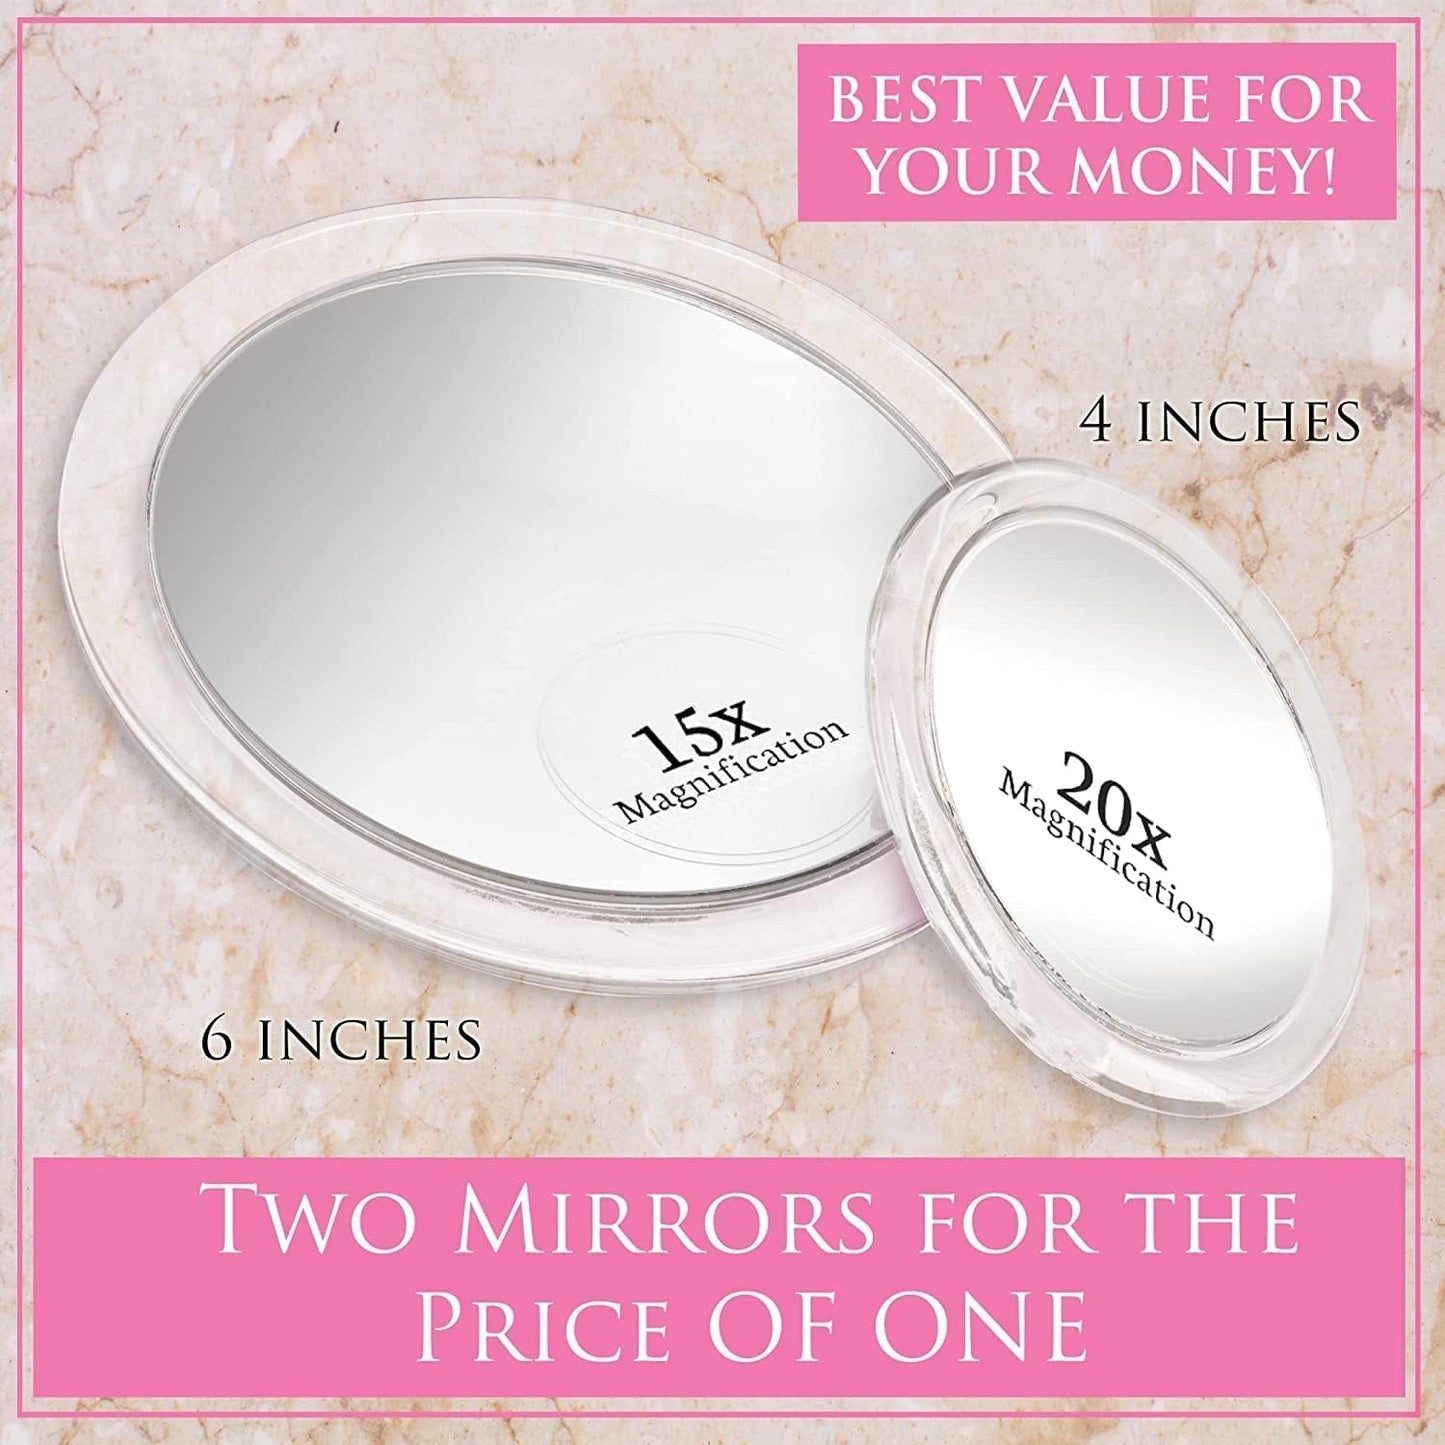 MIRRORVANA 20X & 15X Magnifying Mirror Set with 3 Suction Cups Each - Compact & Travel Ready Mirror for Makeup - Sizes: 6" and 4" Wide